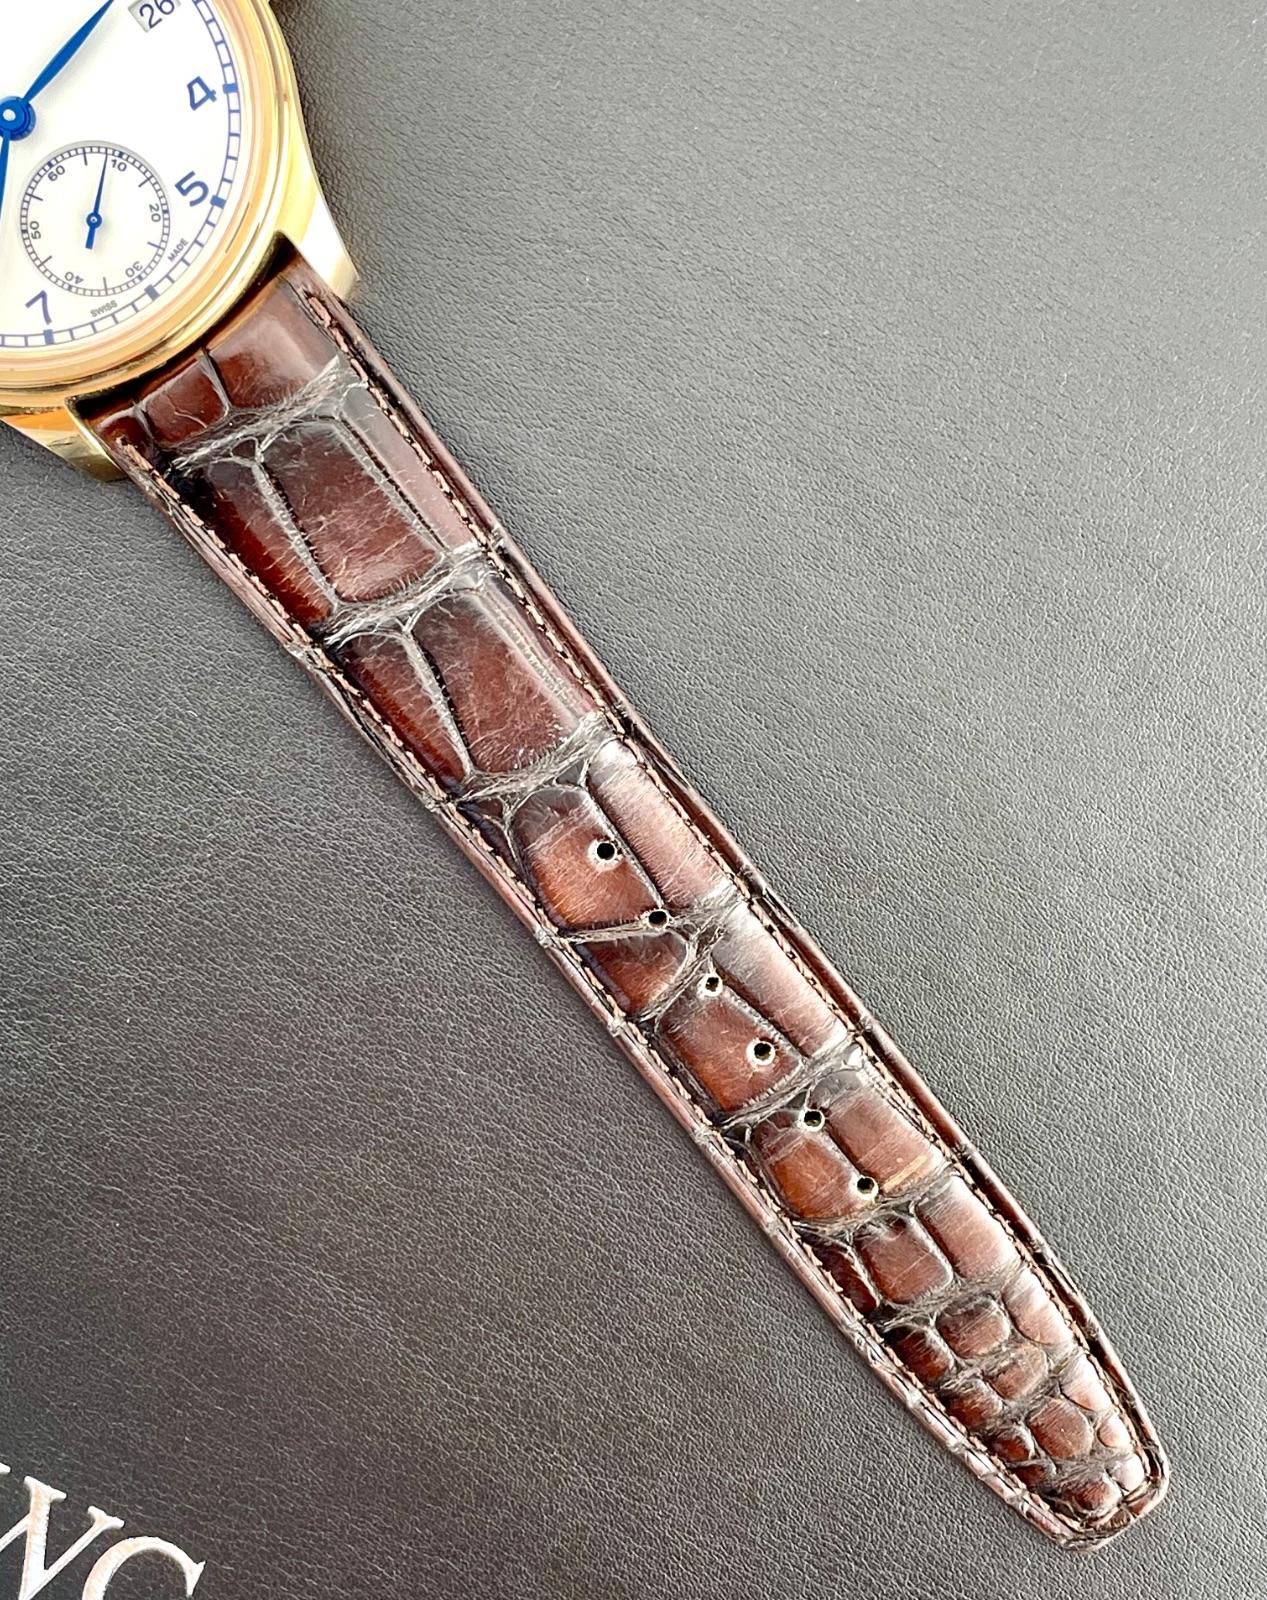 IWC 43MM Schaffhausen Portugieser 18k Rose Gold White Dial Leather Band IW510211 In Excellent Condition For Sale In Pleasanton, CA